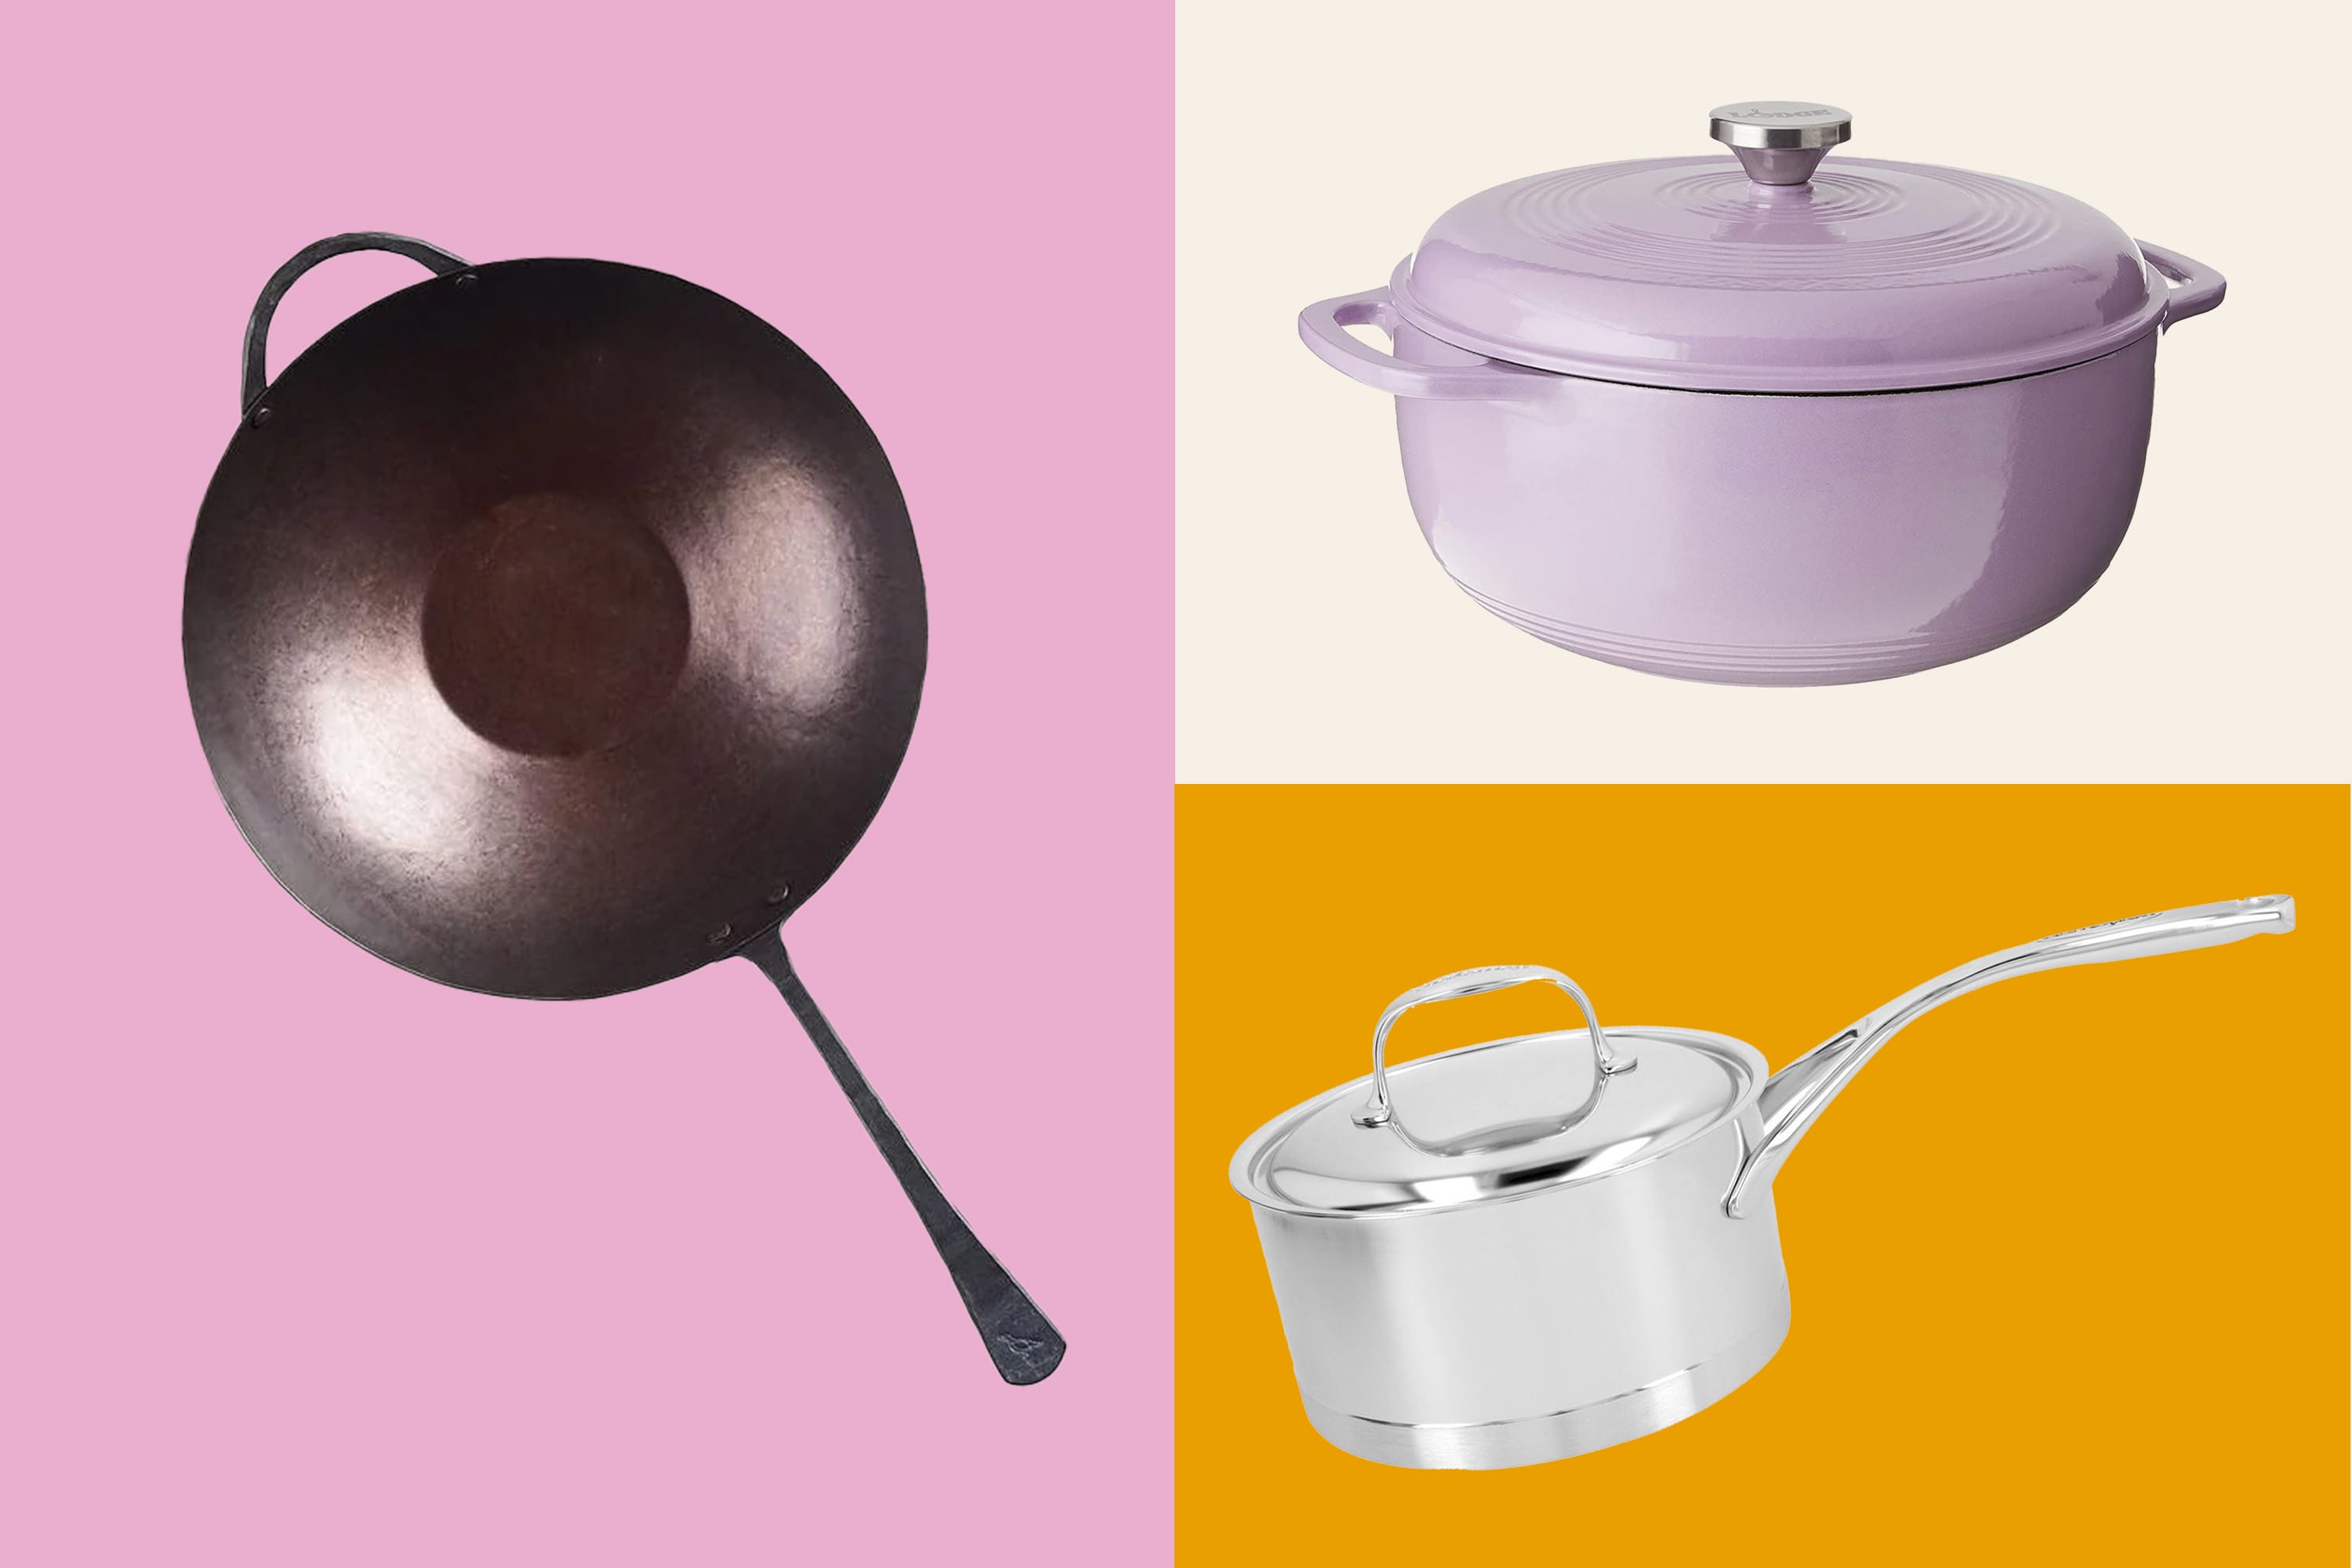 https://cdn.apartmenttherapy.info/image/upload/v1685743089/at/shopping/2023-06/essential-cookware/essential-cookware-lead.jpg